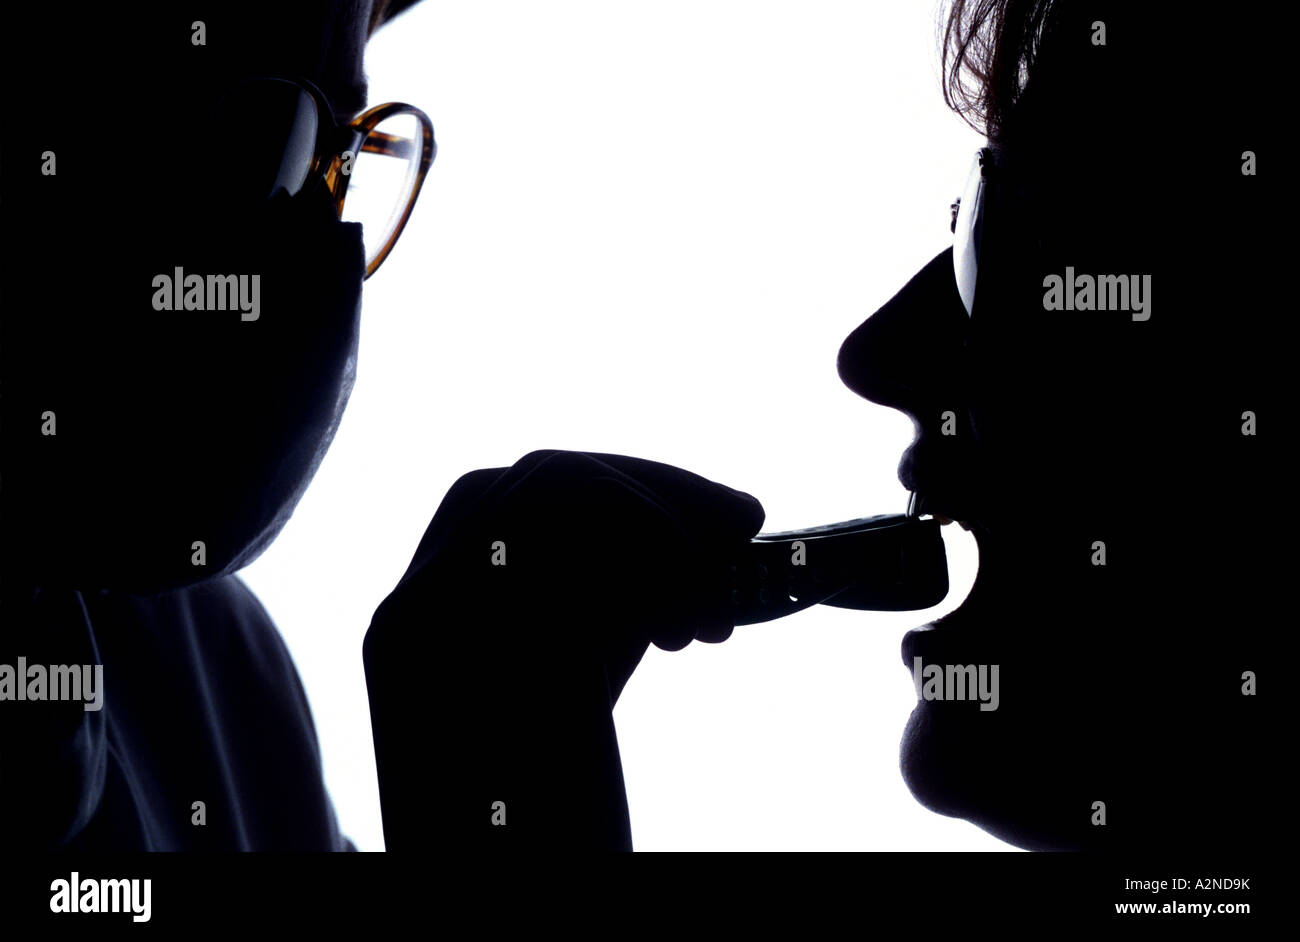 Silhouette of a dentist taking a dental impression. Picture by Jim Holden. Stock Photo